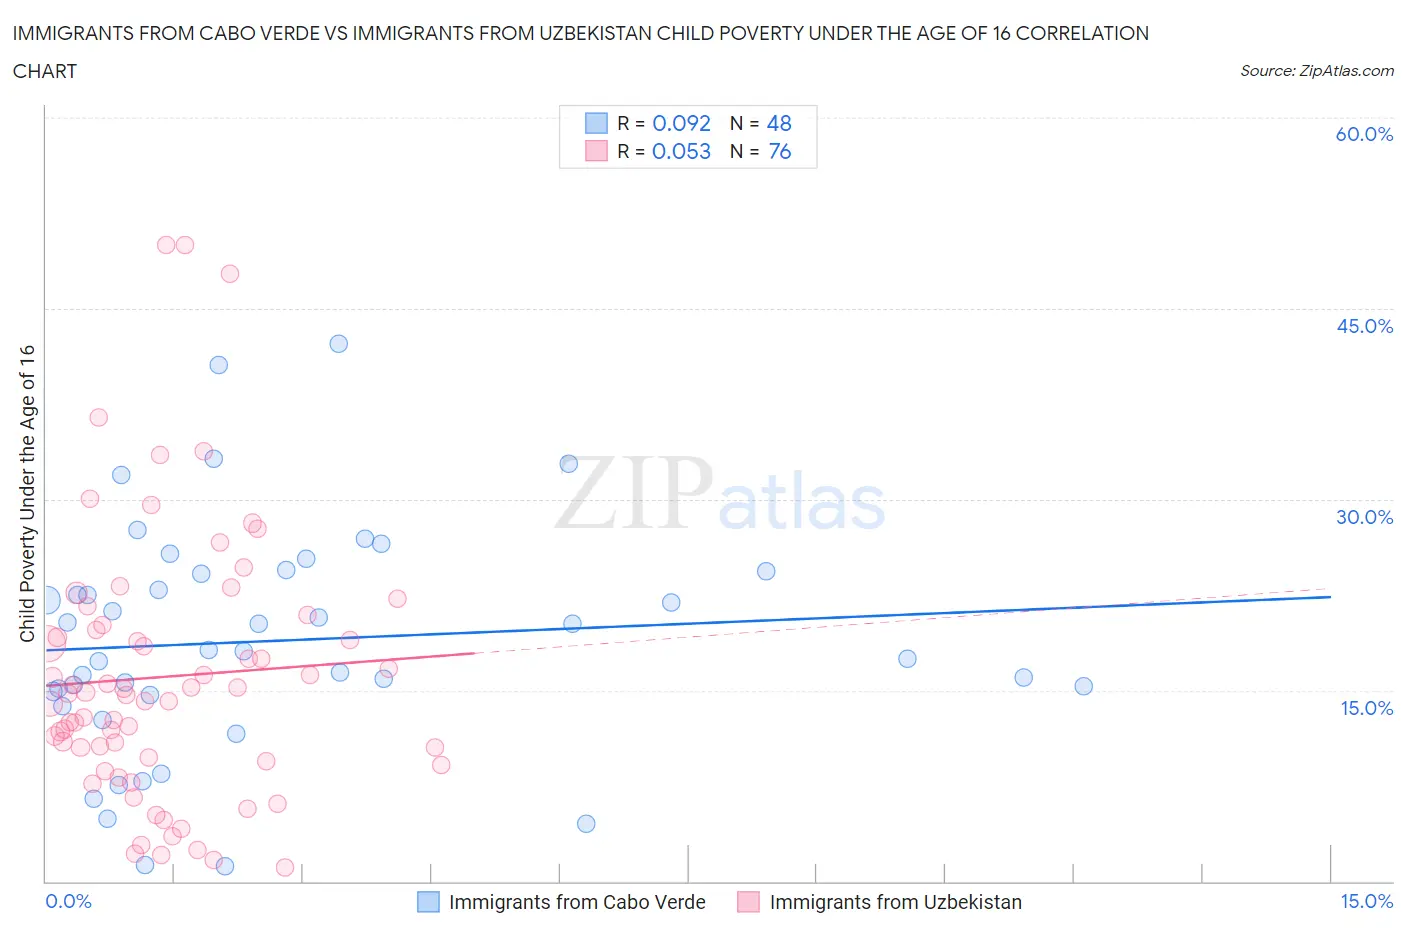 Immigrants from Cabo Verde vs Immigrants from Uzbekistan Child Poverty Under the Age of 16